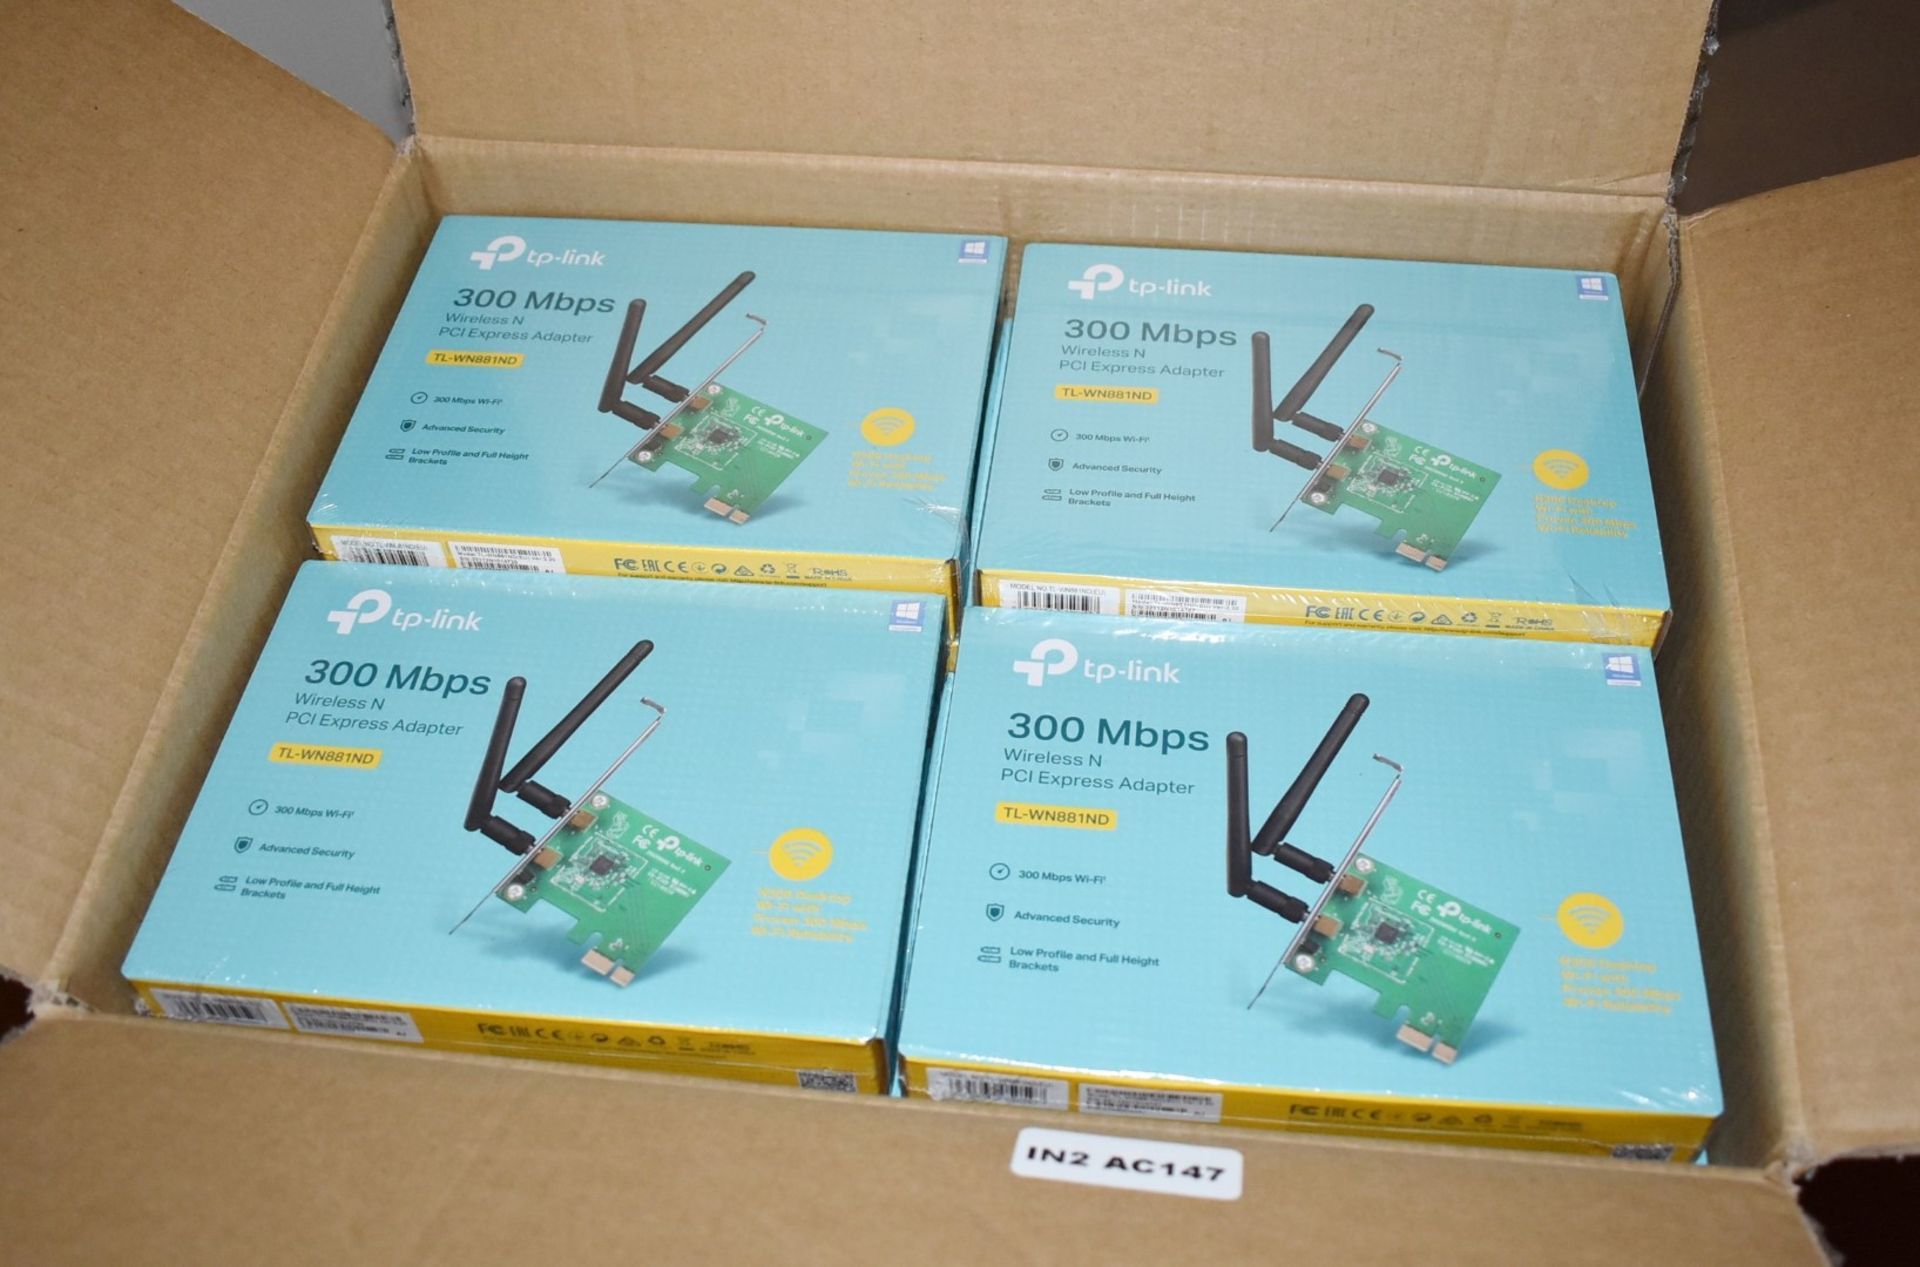 4 x TP Link 300Mbps Wireless N PCI Express Adapters - TL-WN881ND - New Sealed Stock - Image 2 of 6